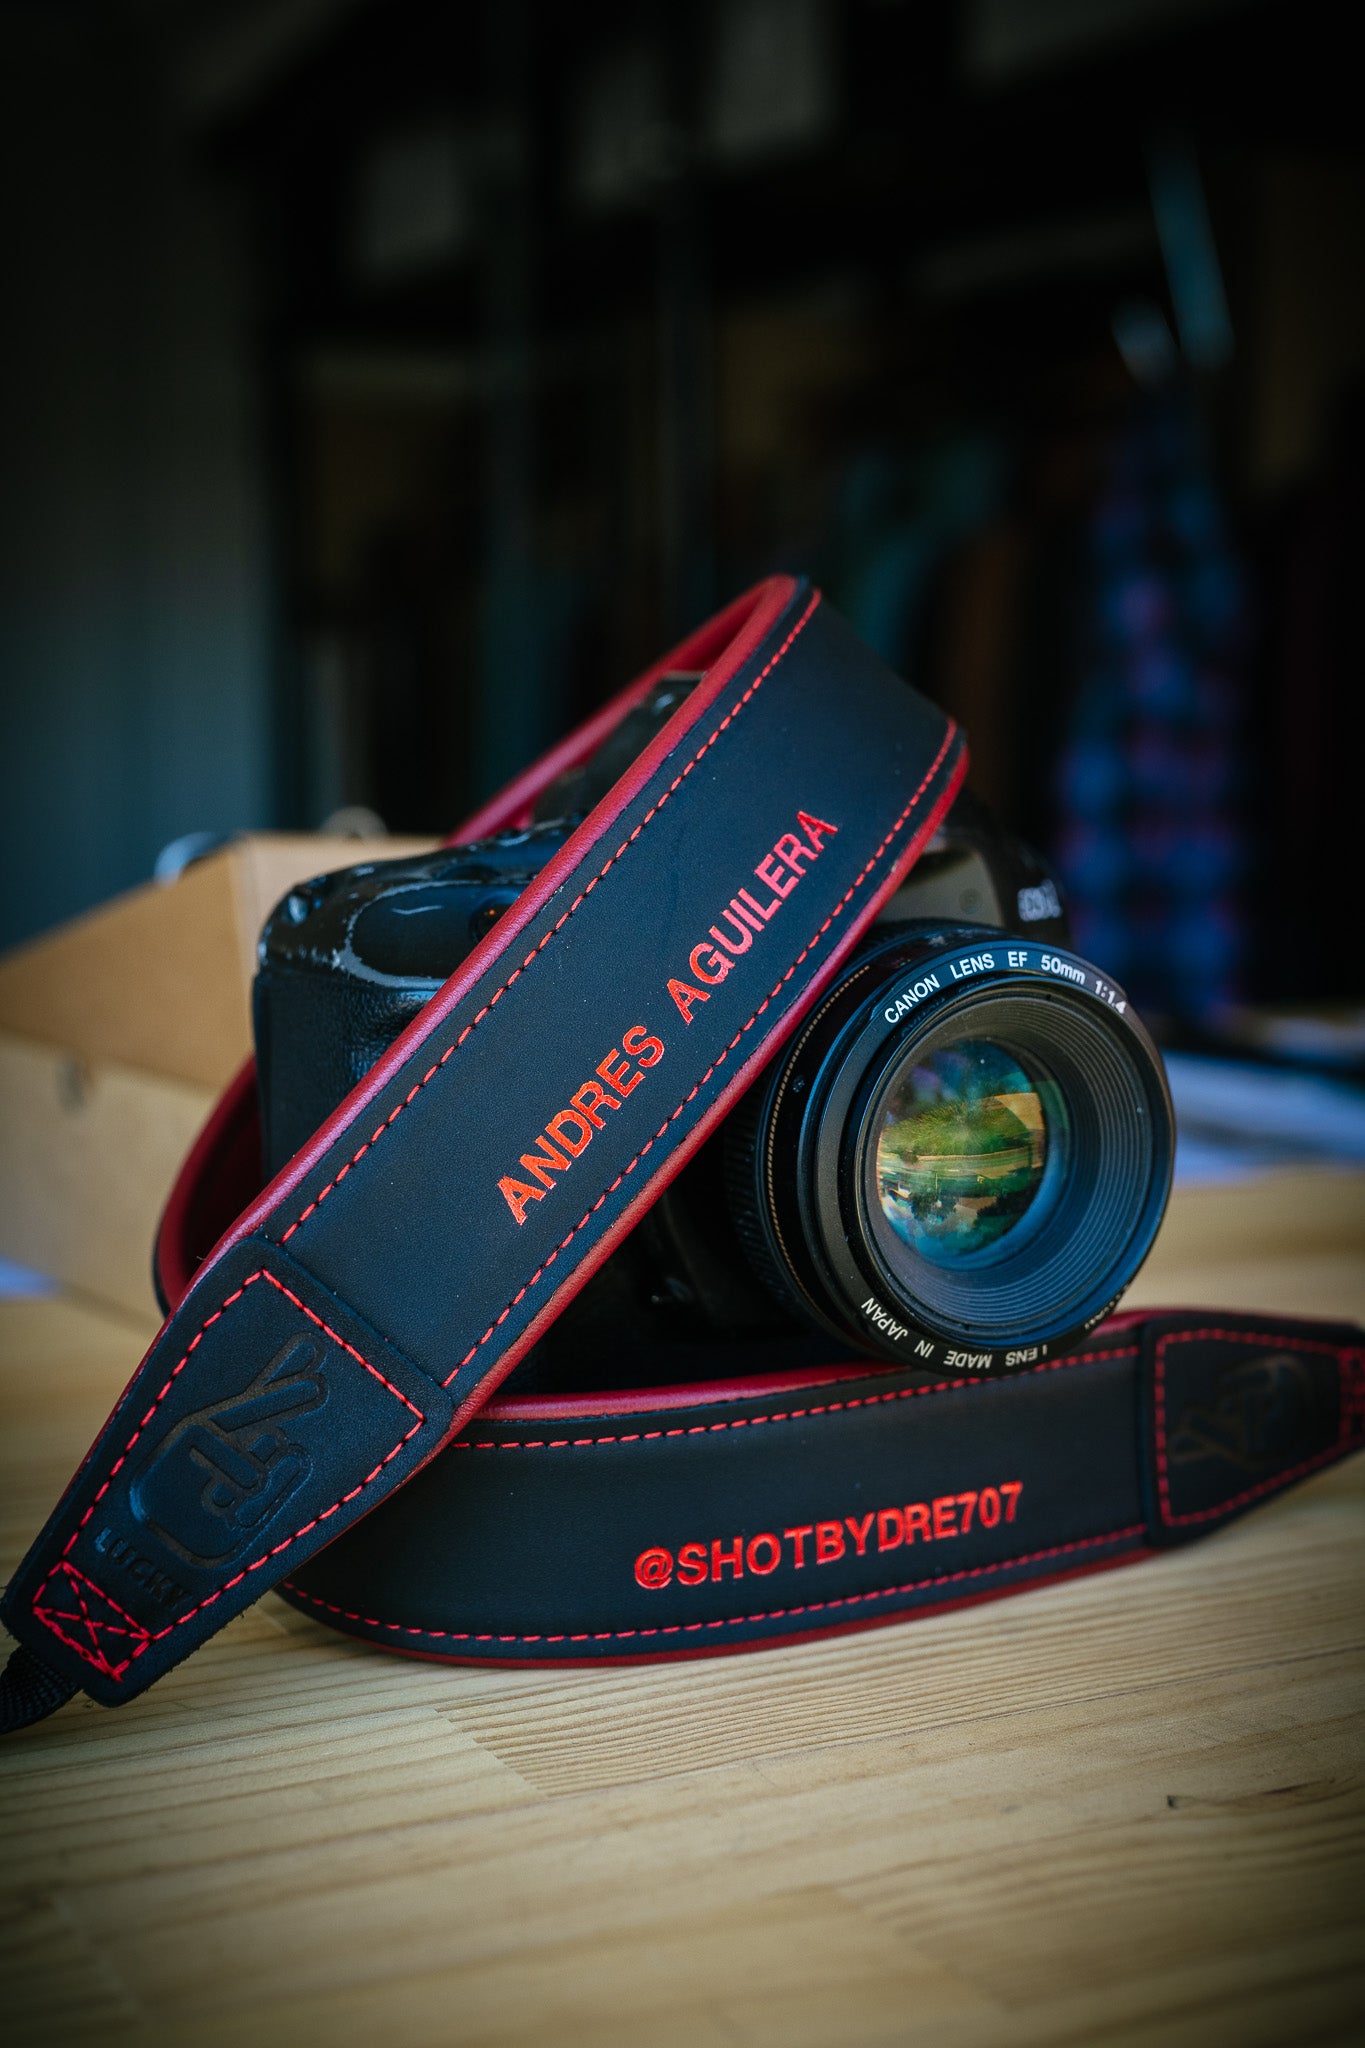 Personalised leather camera strap in black and red leather